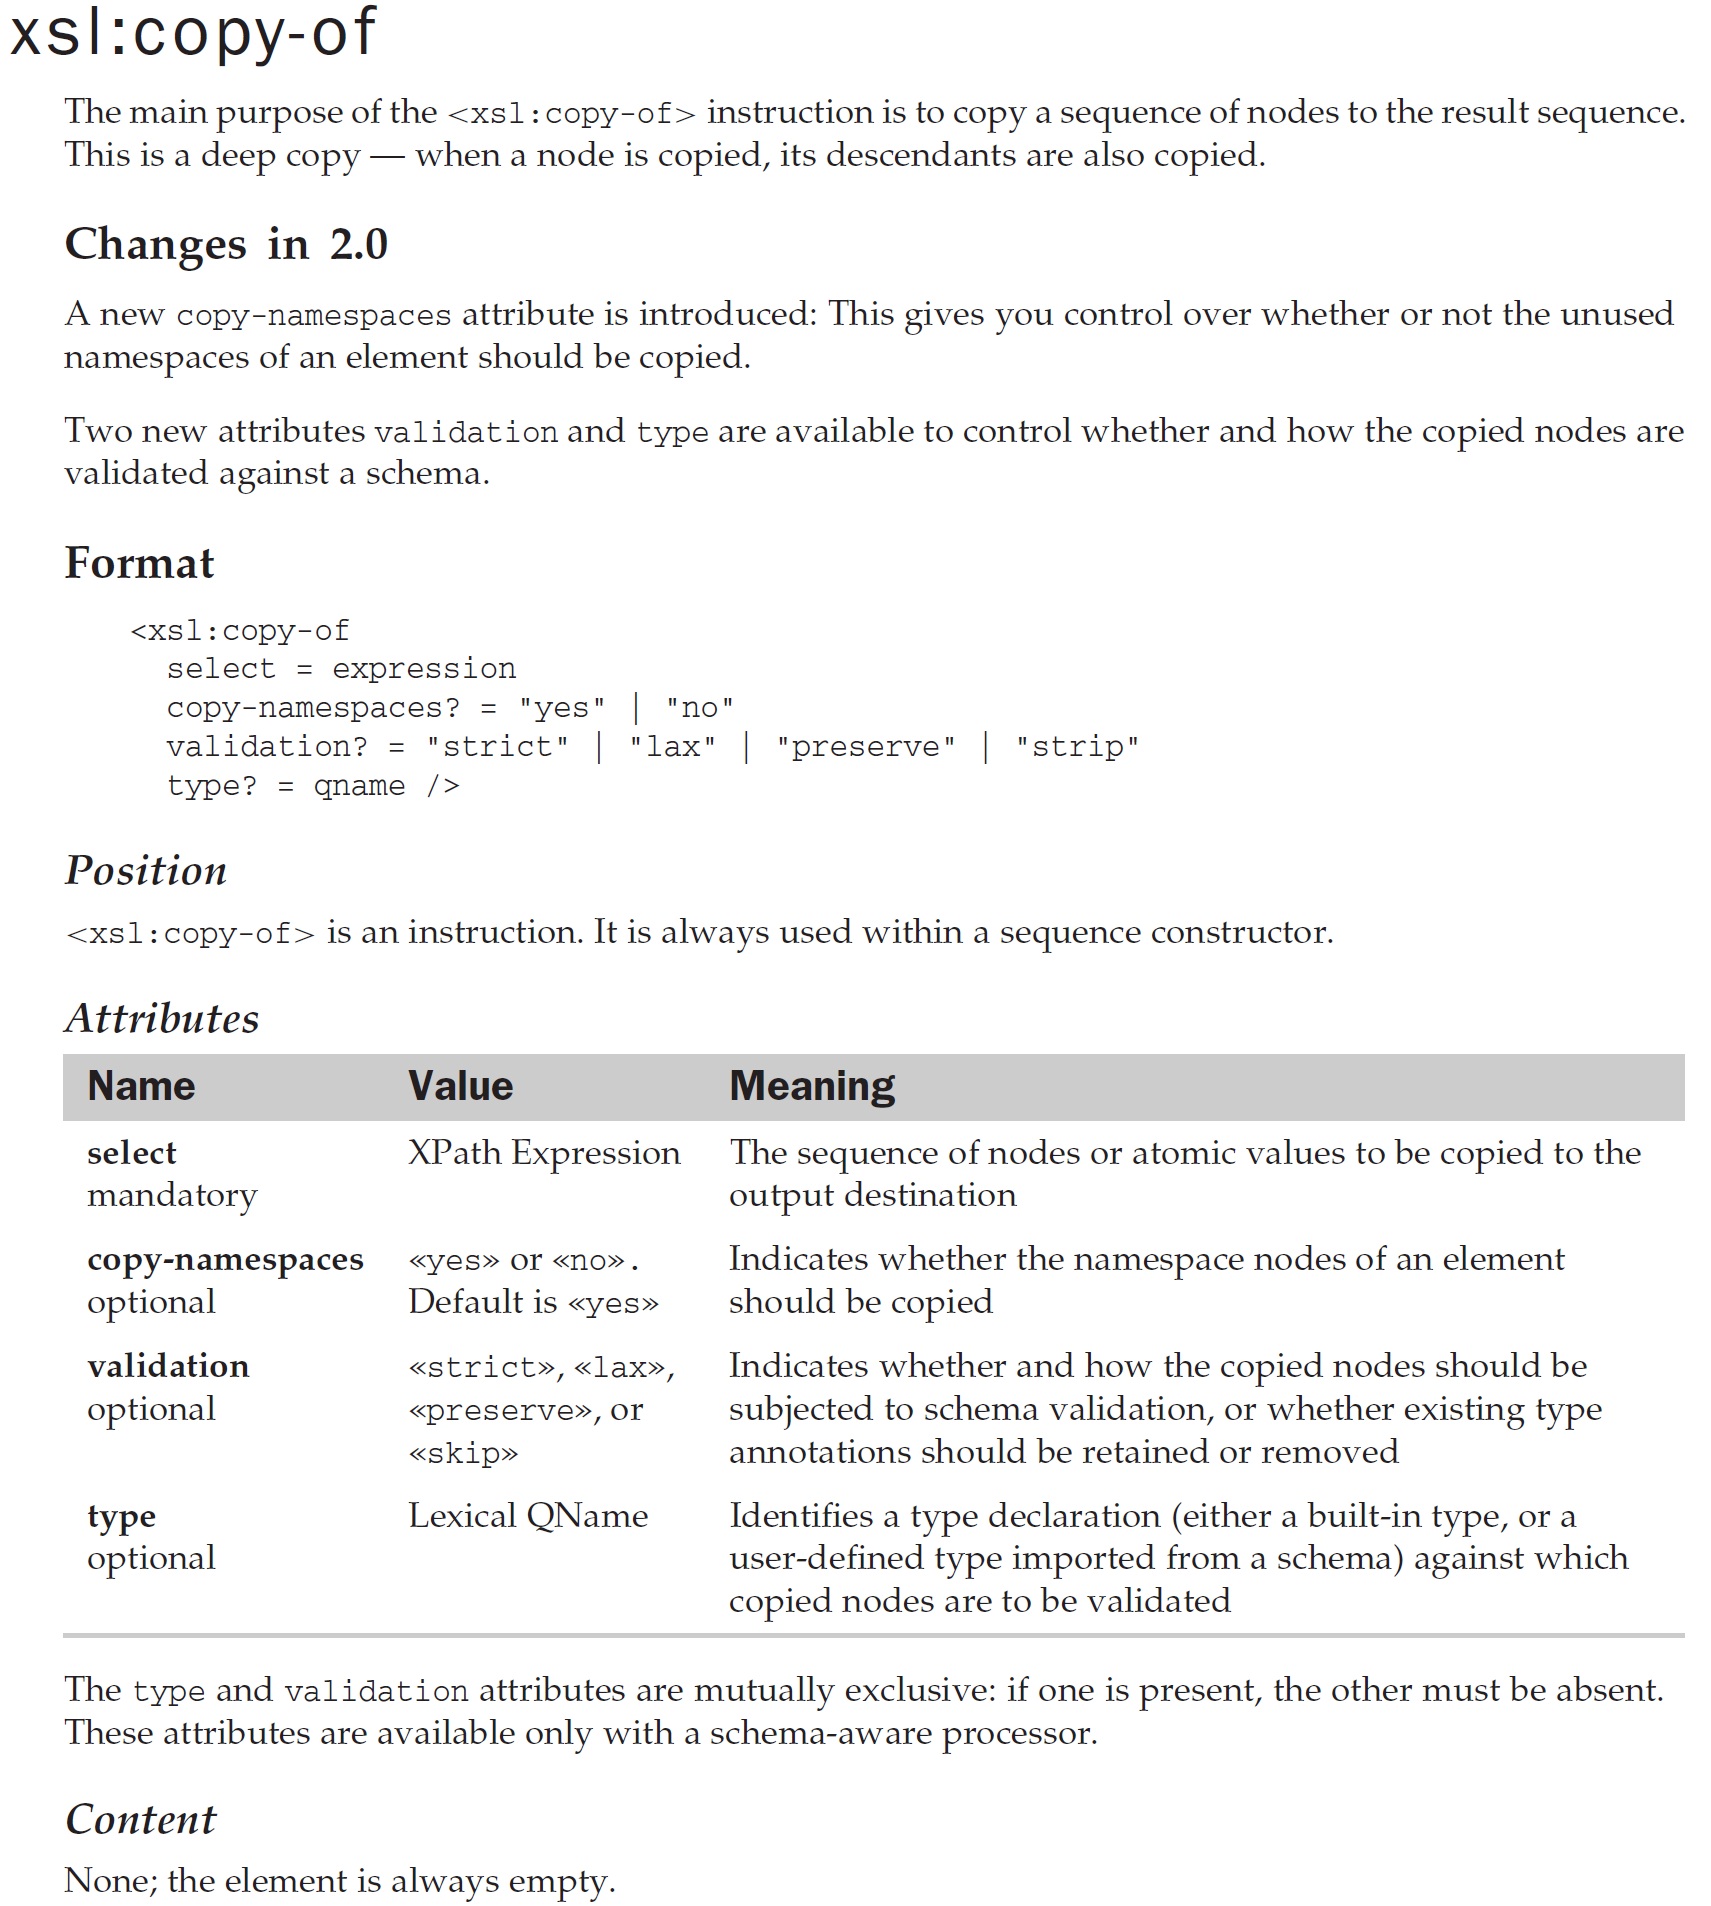 An excerpt from the documentation of XSLT